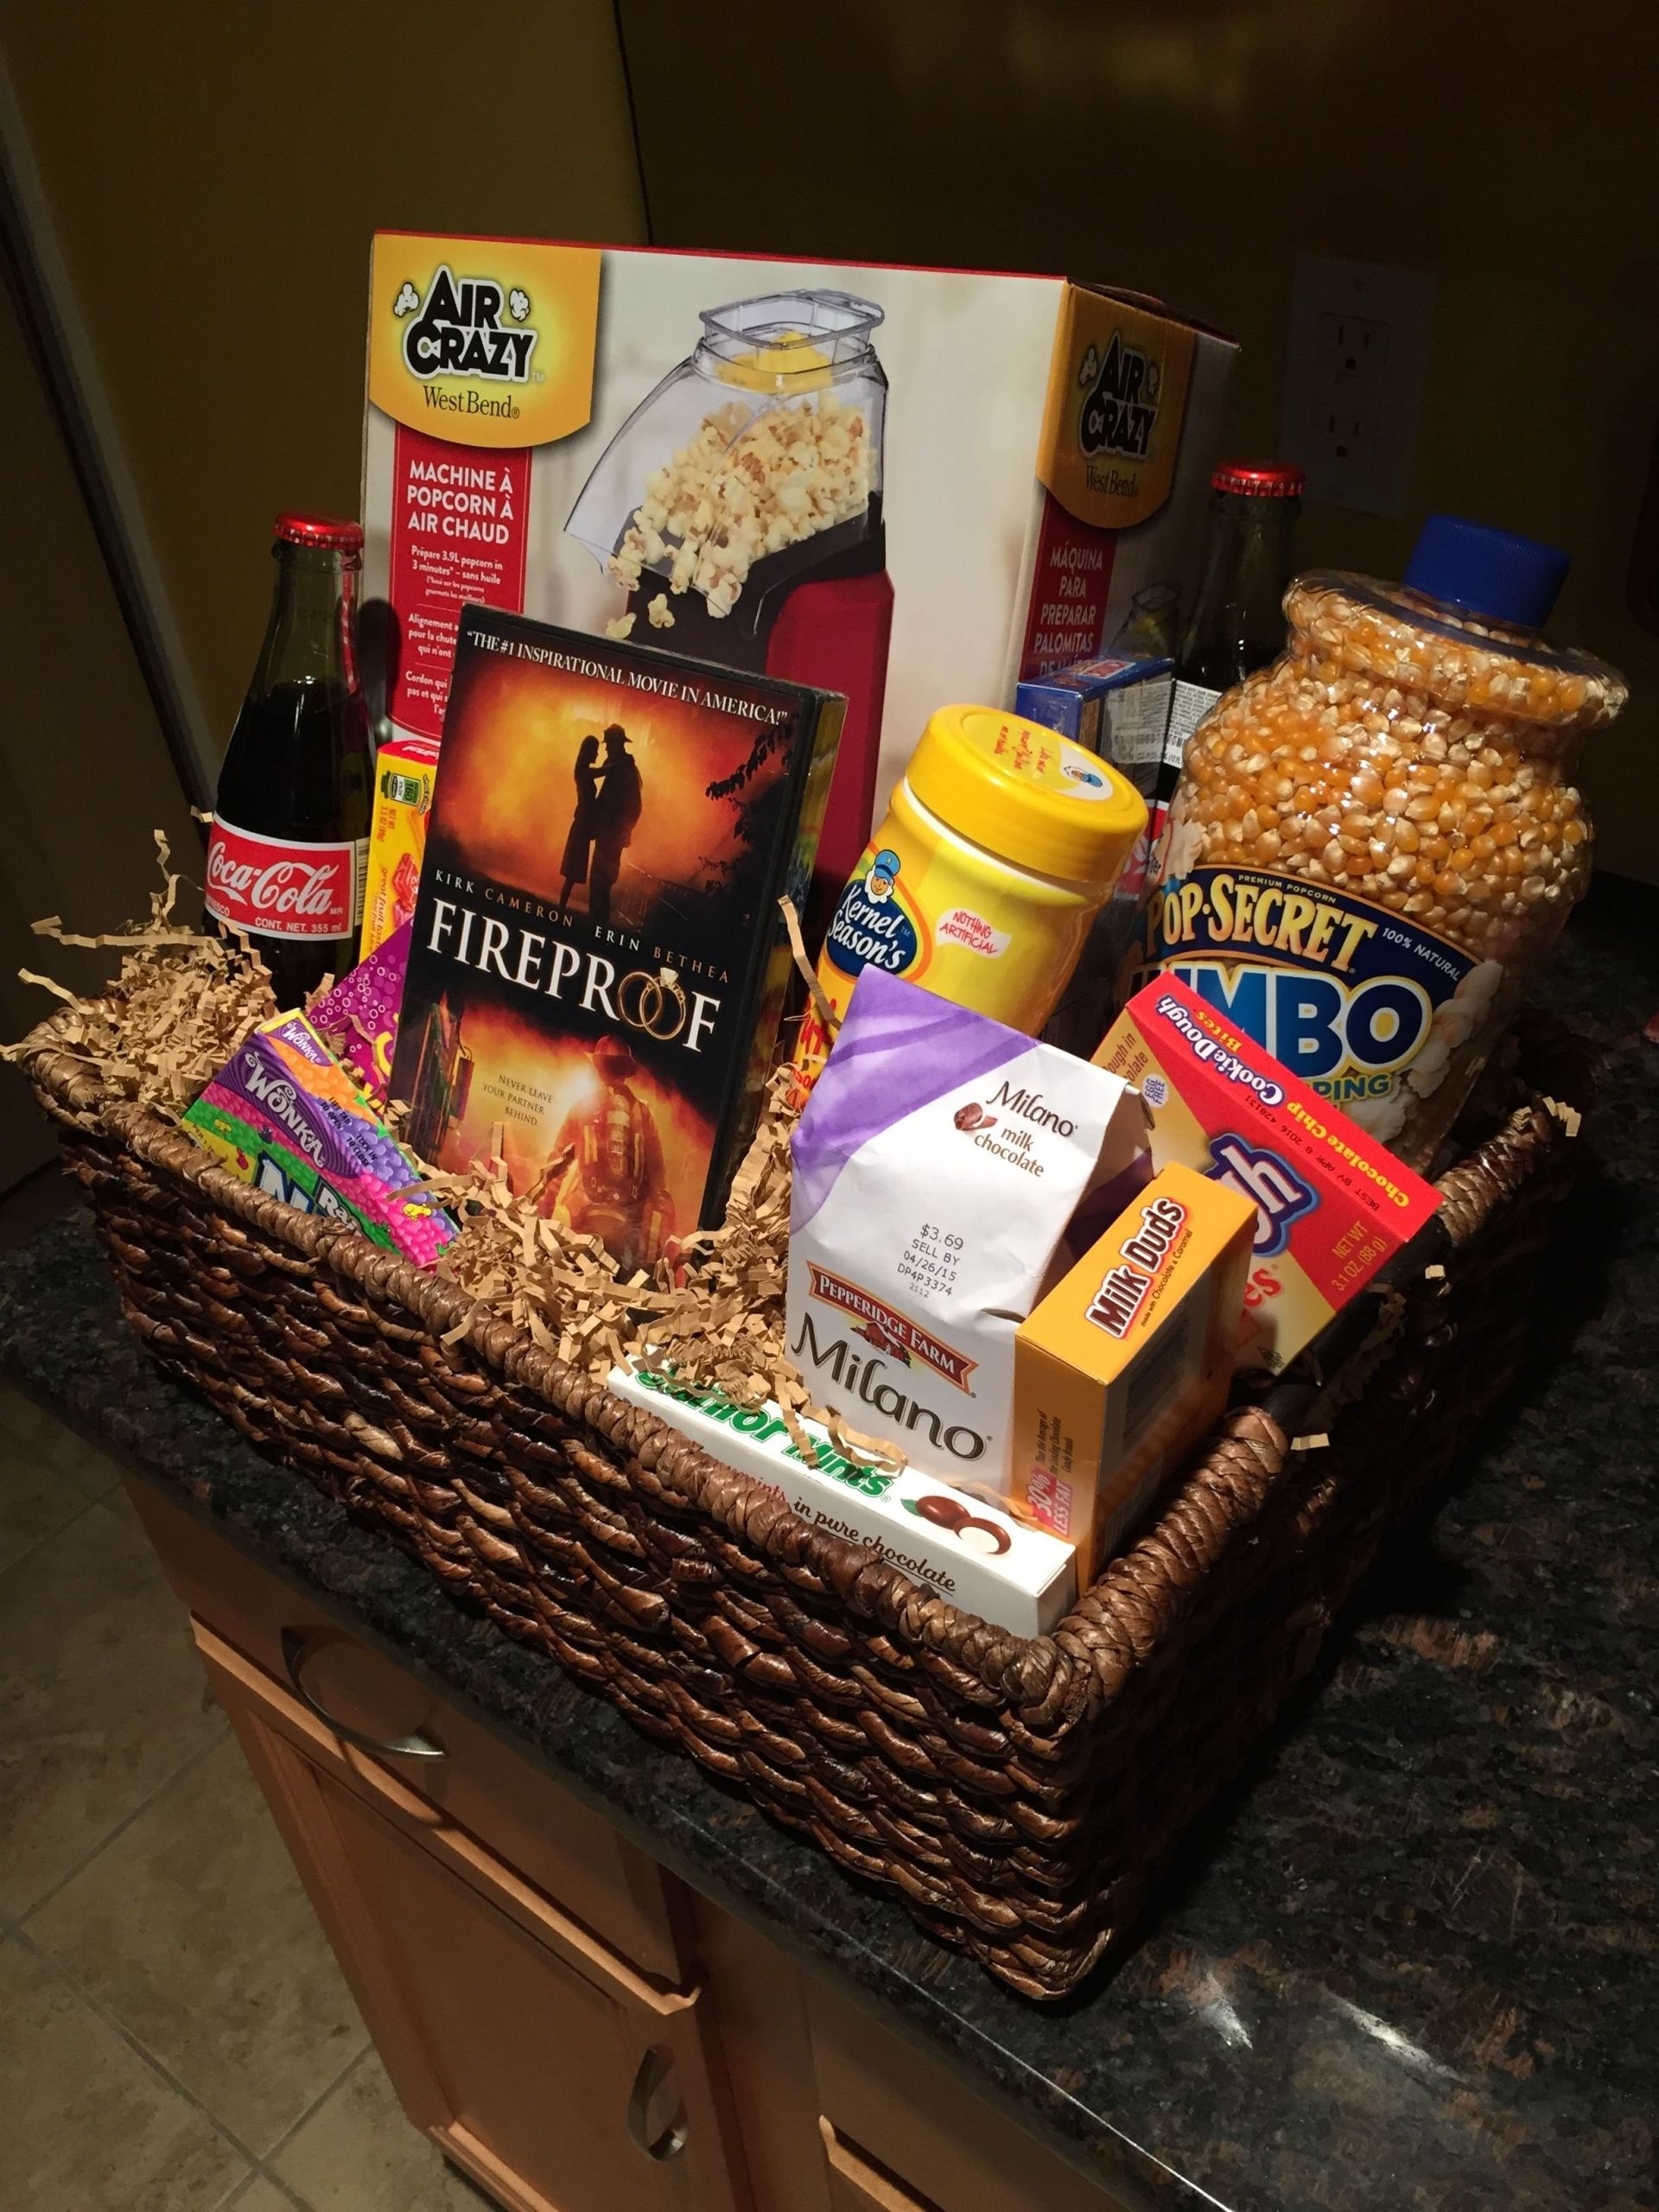 Auction Gift Basket Ideas
 10 Best Ideas For Gift Baskets For Fundraisers 2019